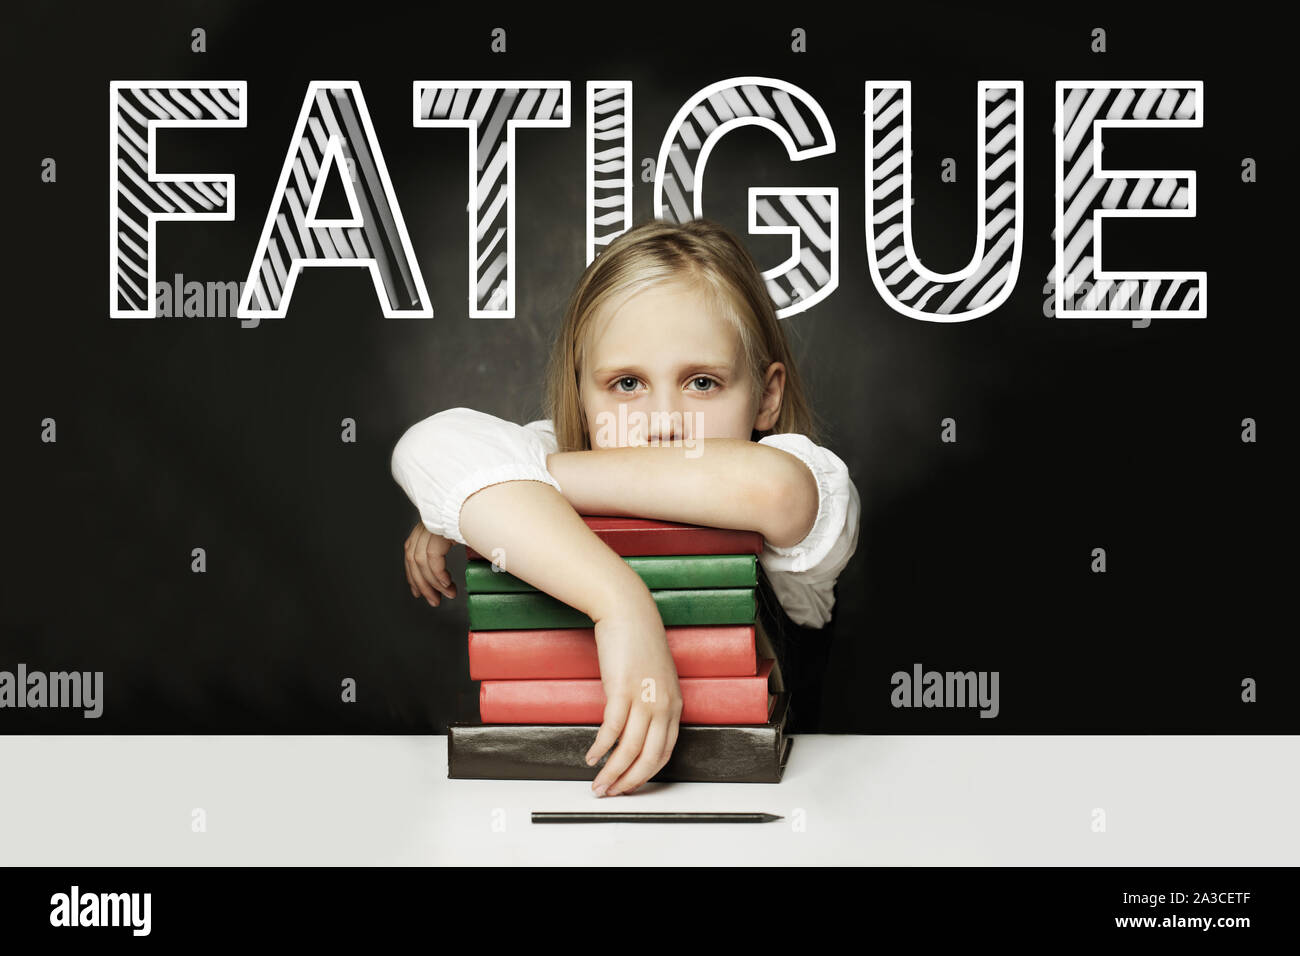 Sad Tired child with books. Fatigue concept Stock Photo